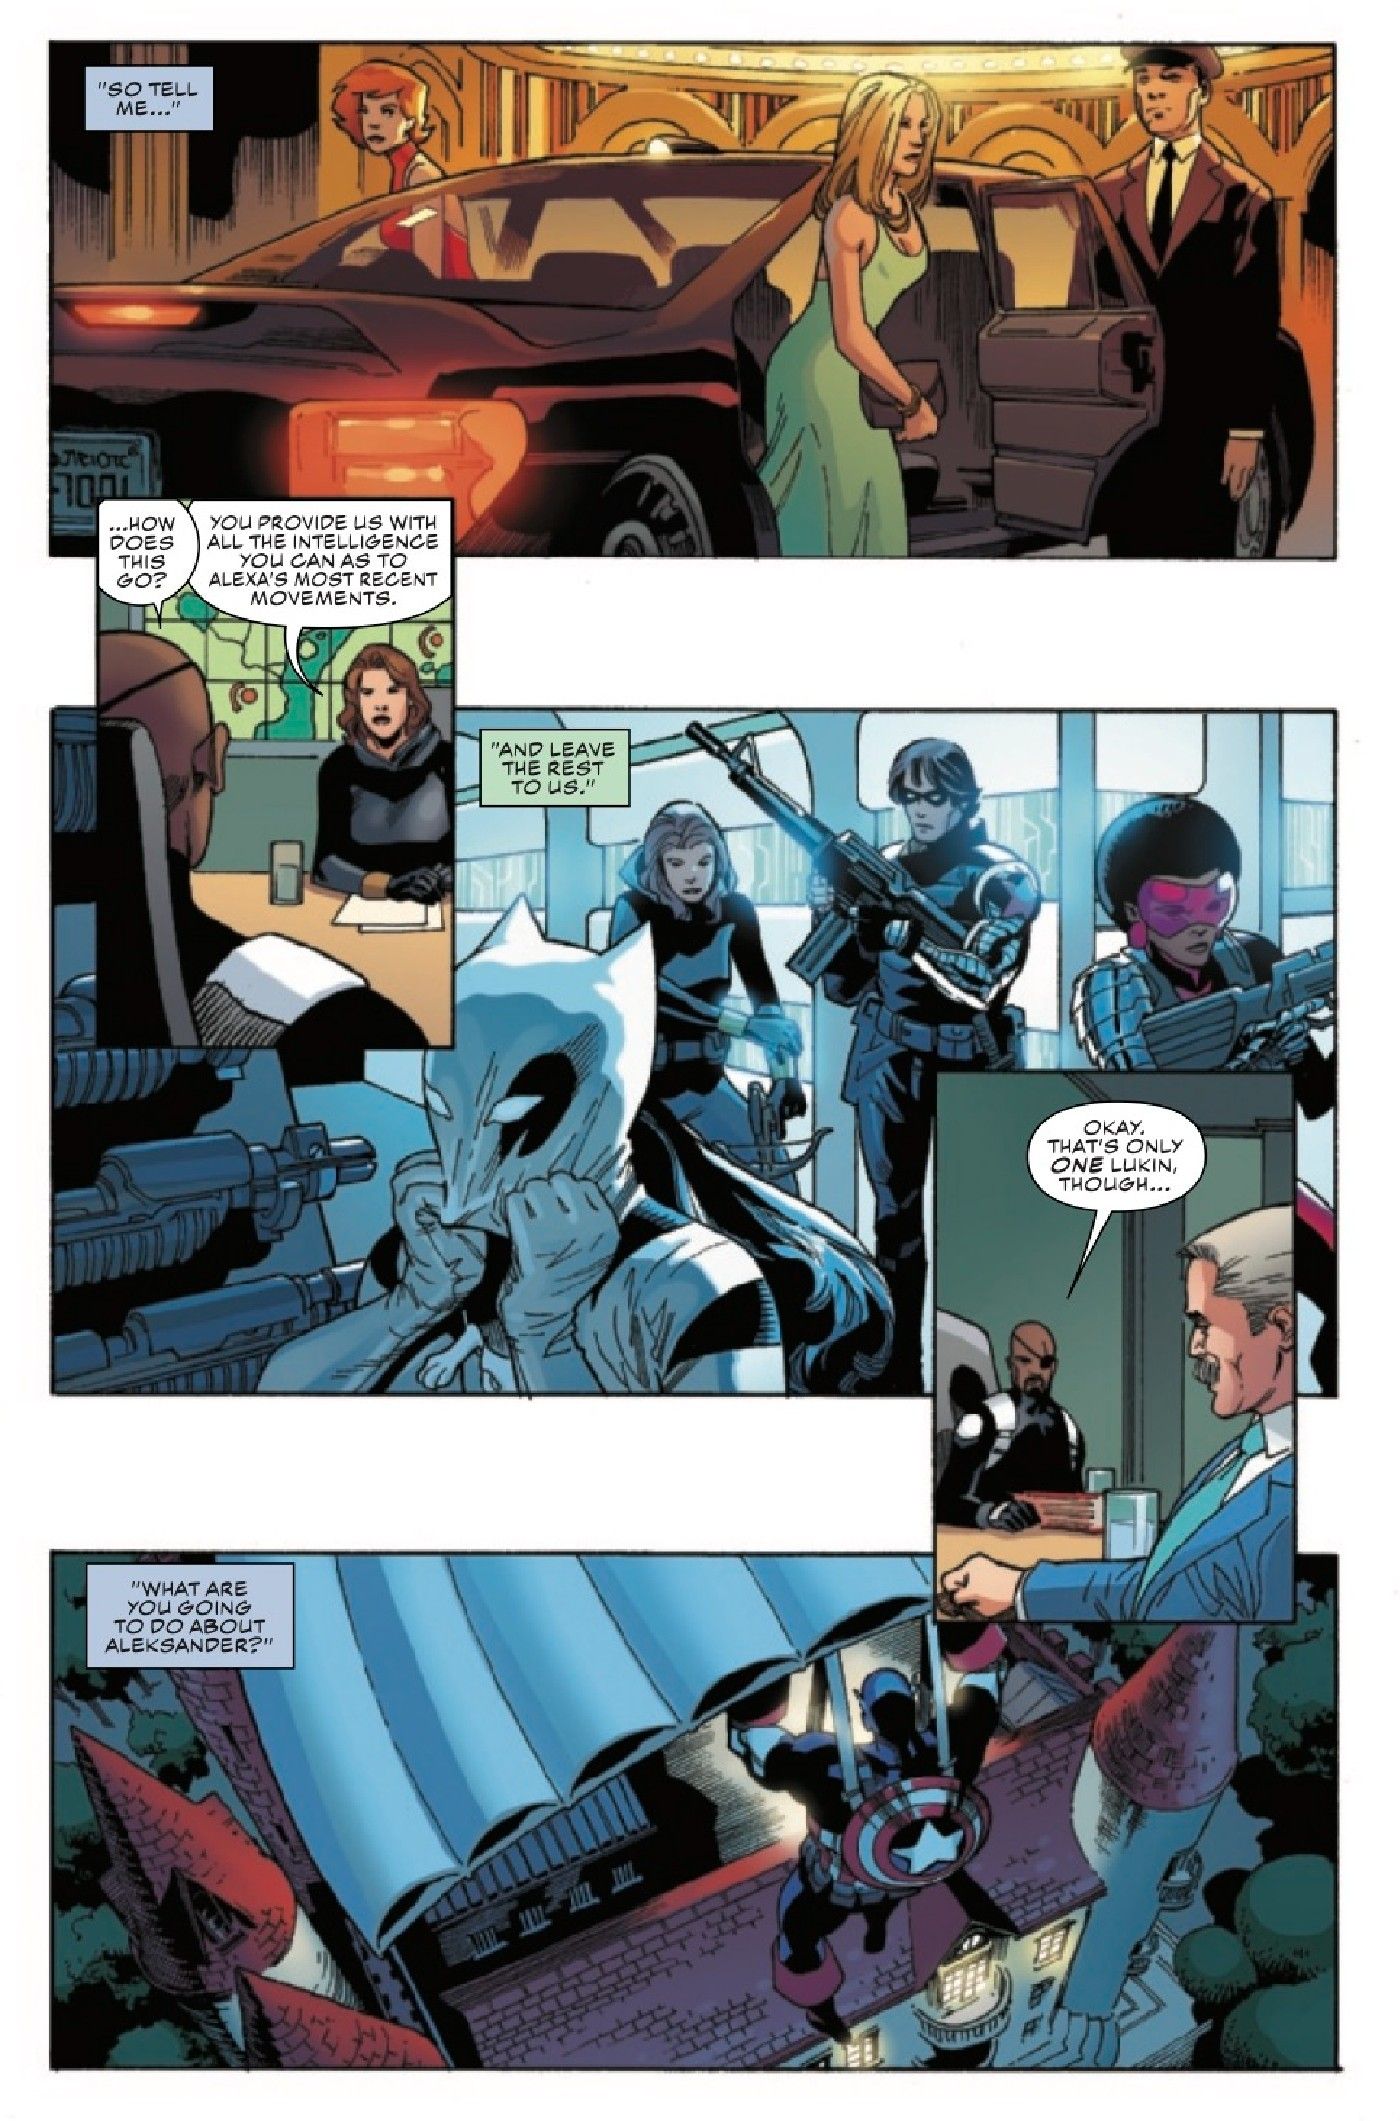 Captain America 29 preview page 2 (1)